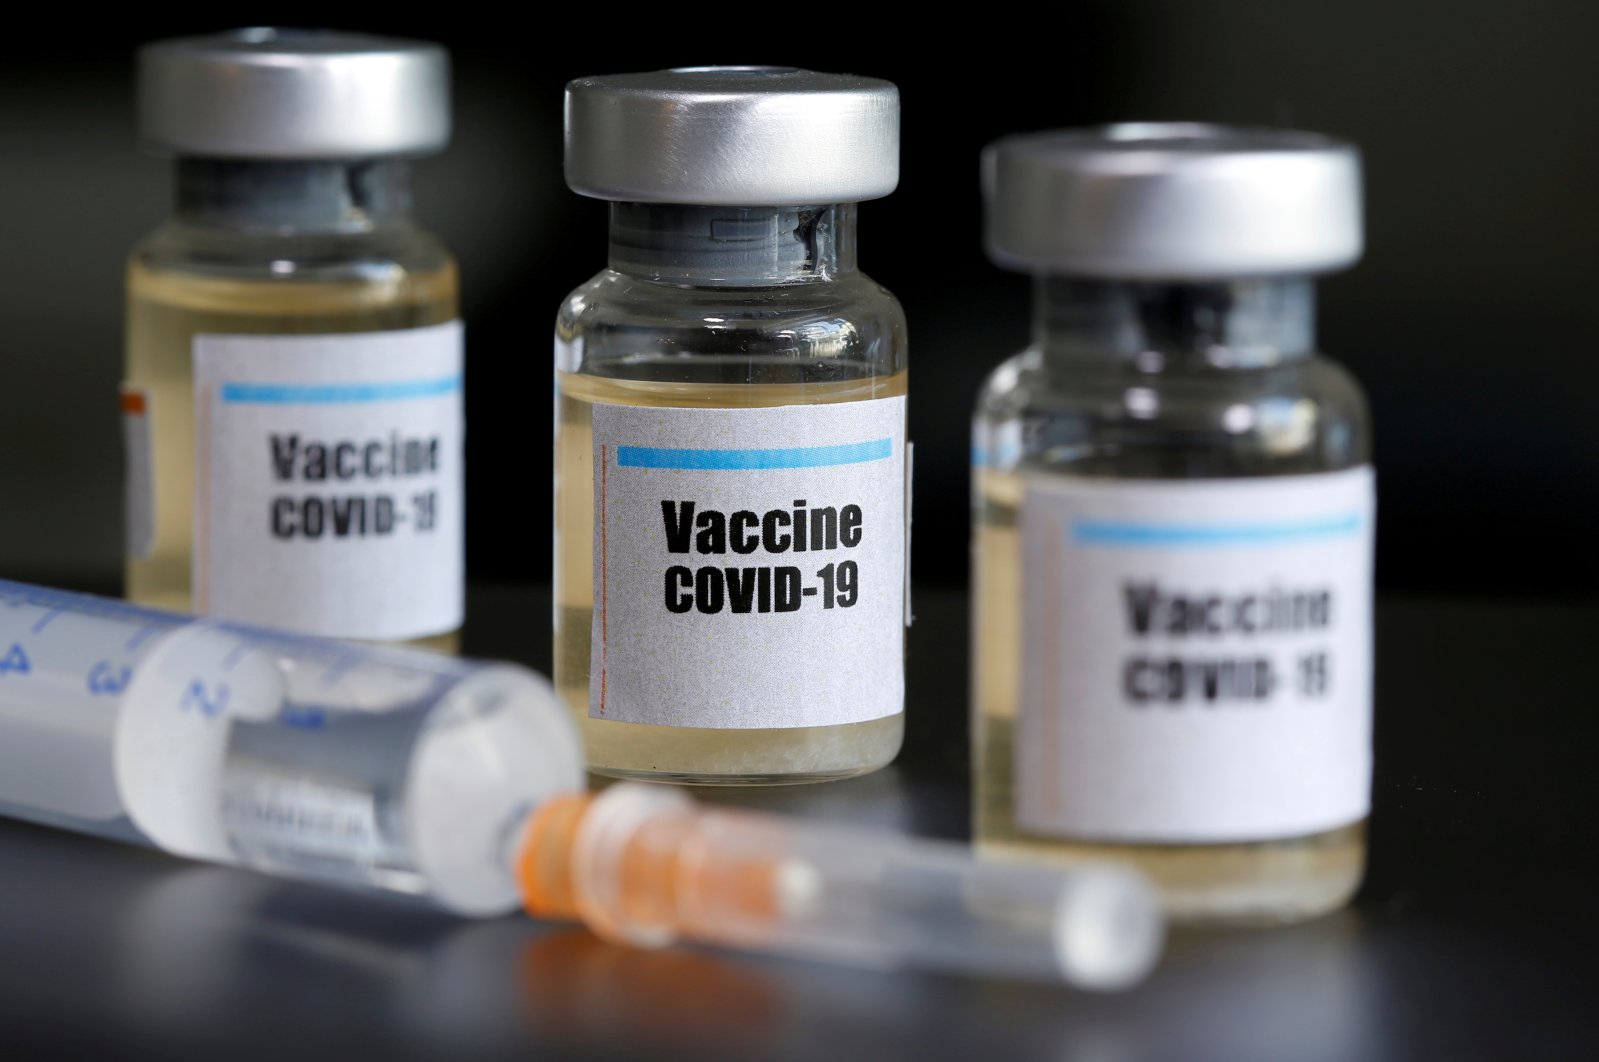 Small bottles labeled with a "Vaccine COVID-19" sticker and a medical syringe are seen in this illustration taken April 10, 2020. (Reuters Photo)